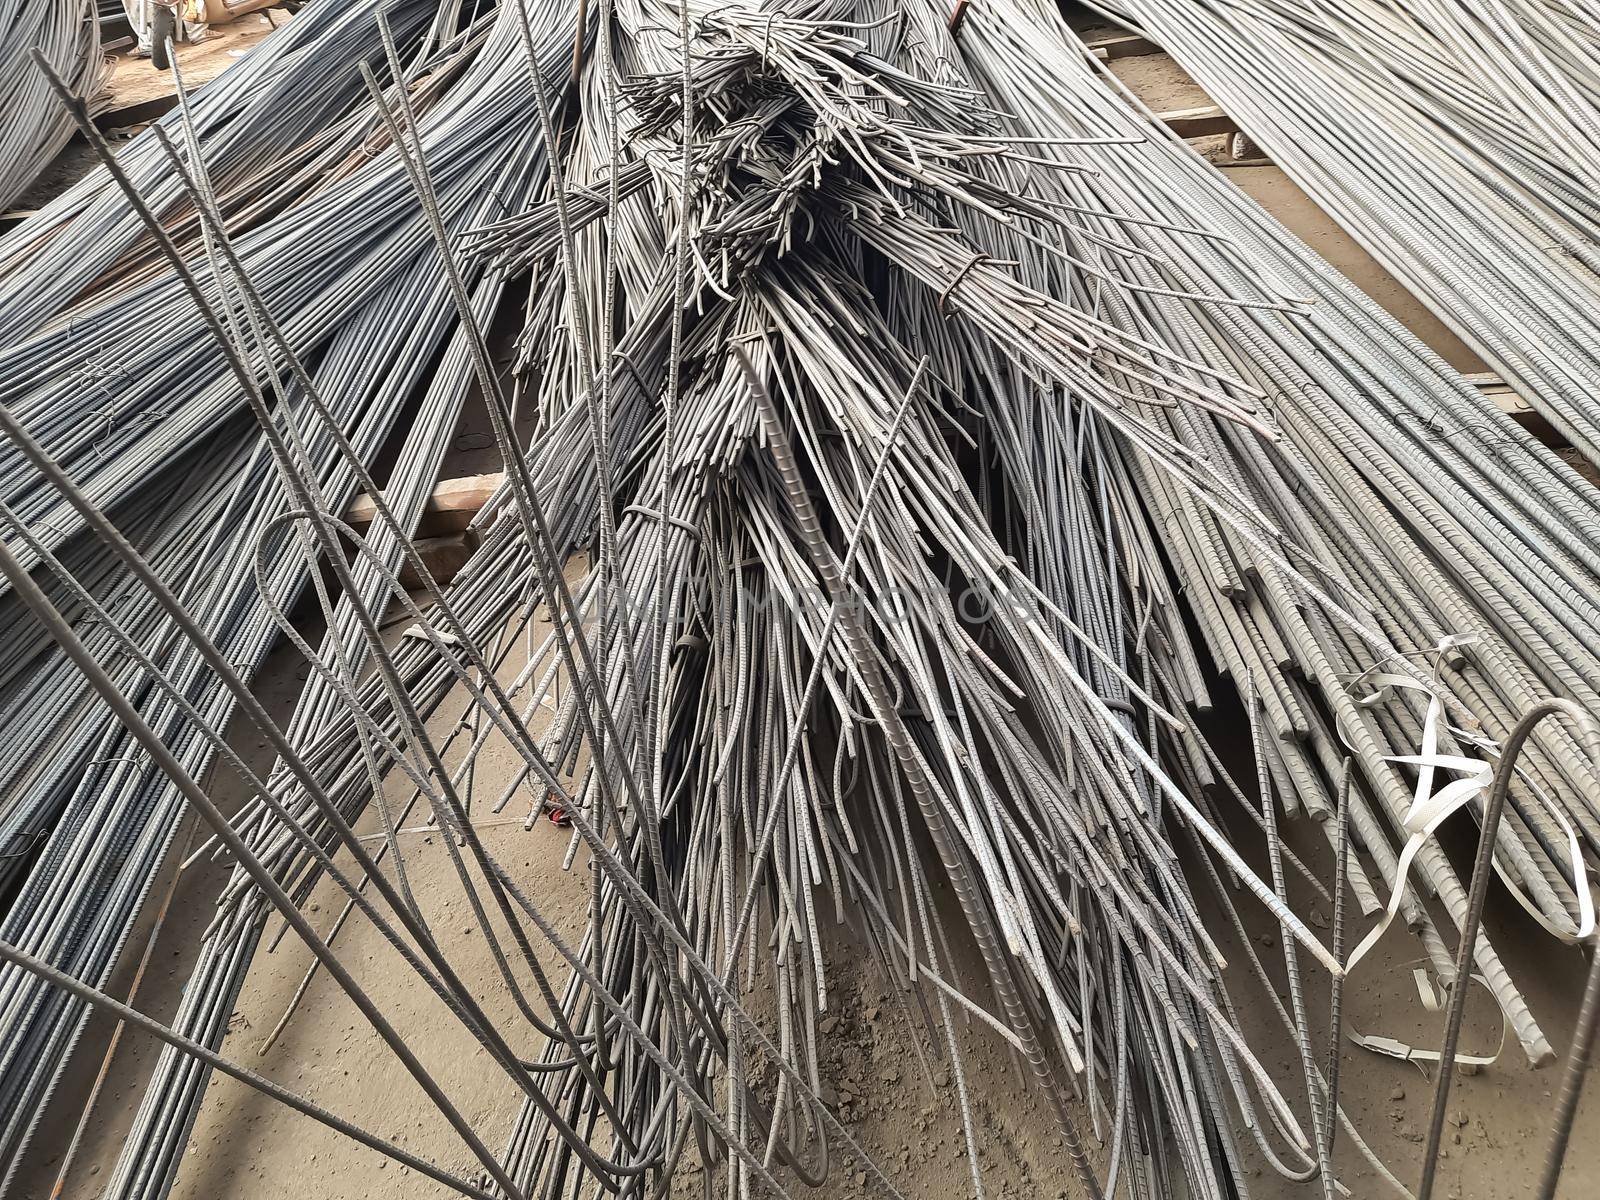 Steel rods used to reinforce concrete in construction